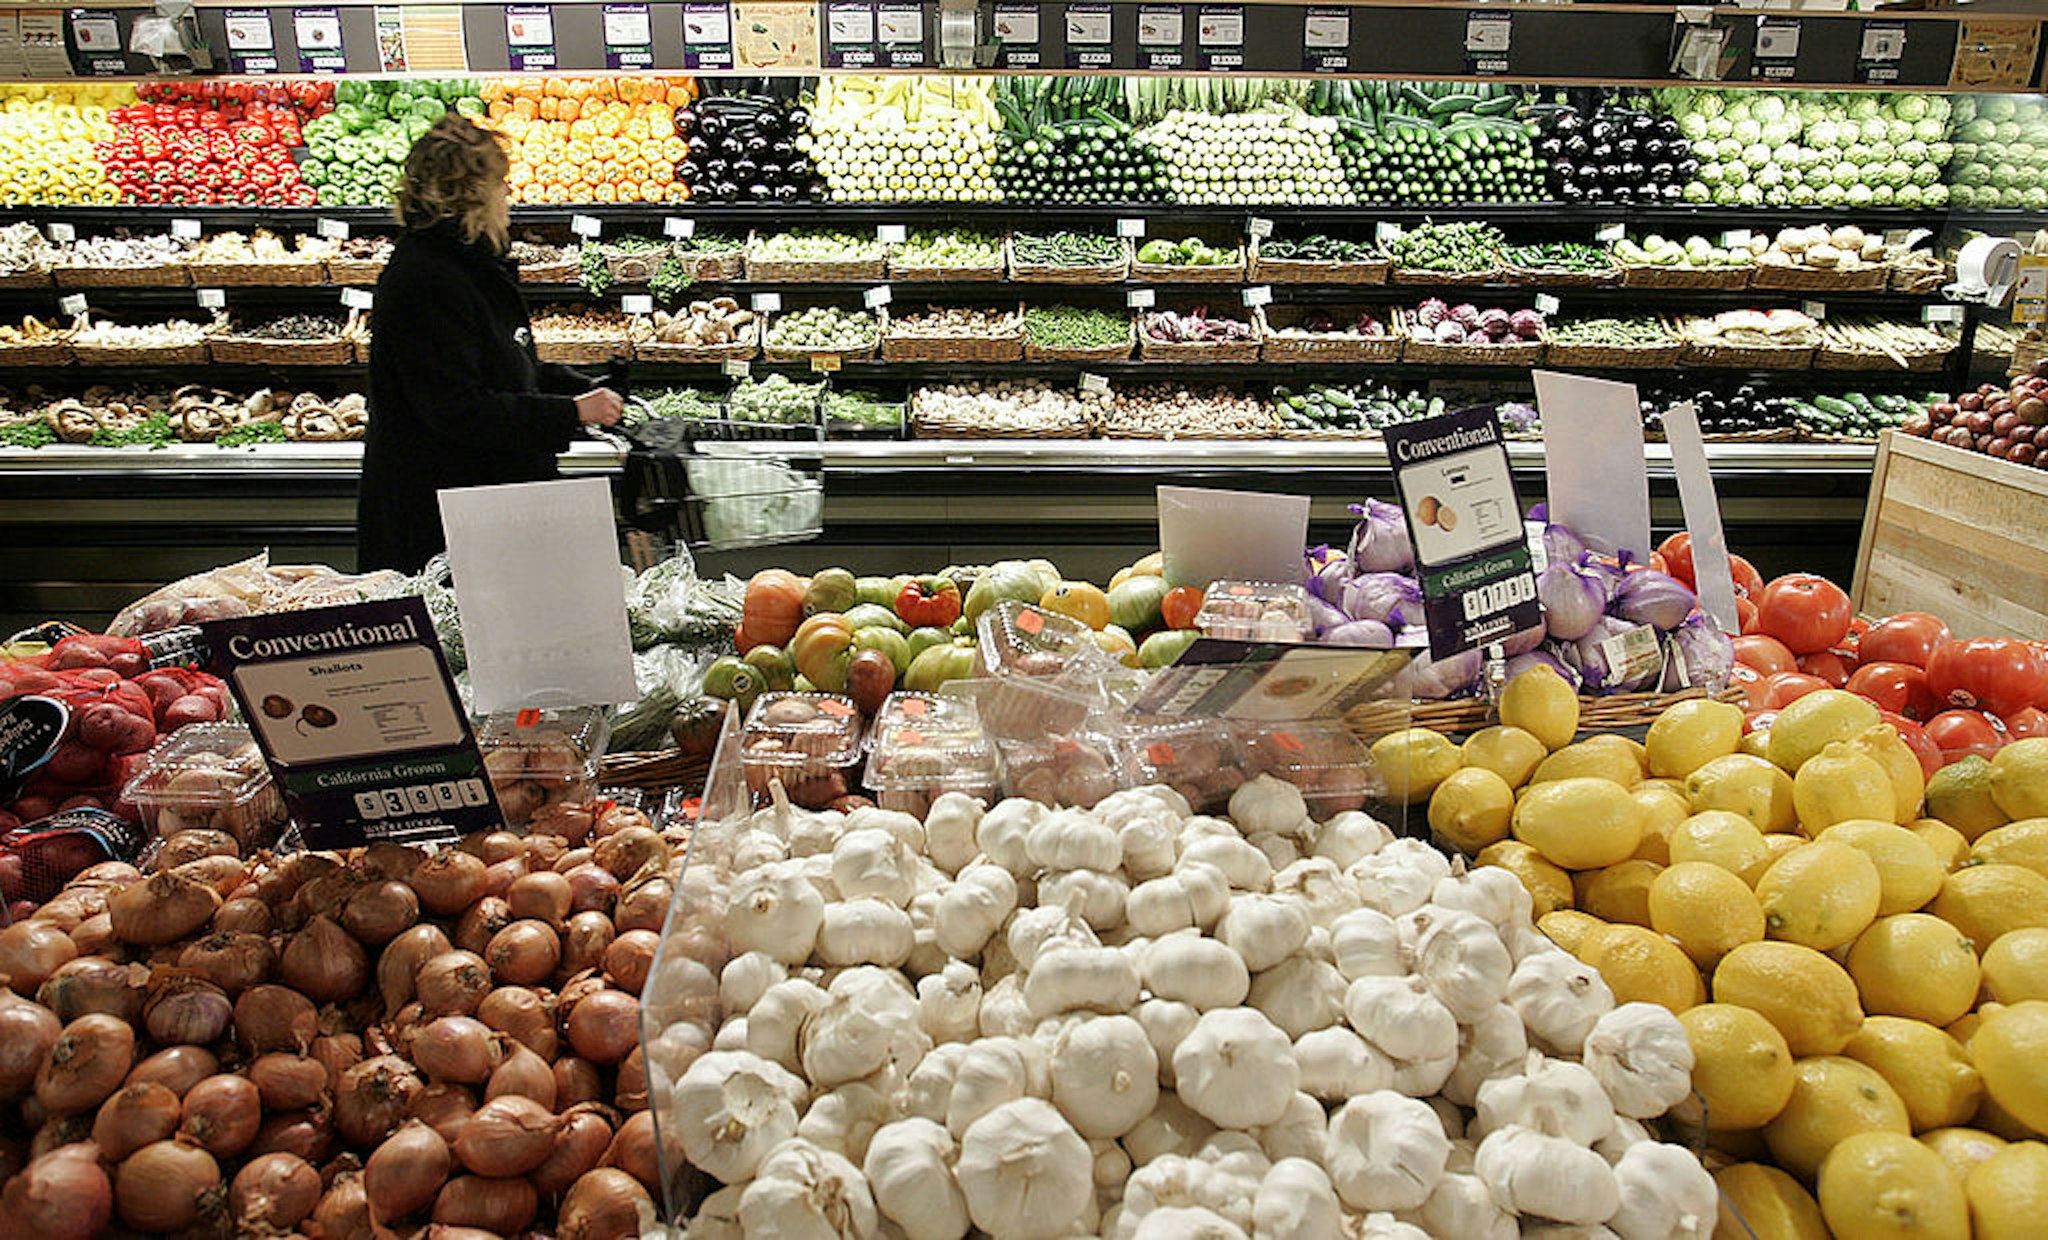 NEW YORK - JANUARY 13: A woman shops in the produce section at Whole Foods January 13, 2005 in New York City. New eating guidelines issued by the U.S. government stress the need to eat more vegetables, fruits and whole grains and to excercise between 30-90 minutes a day to promote good health.